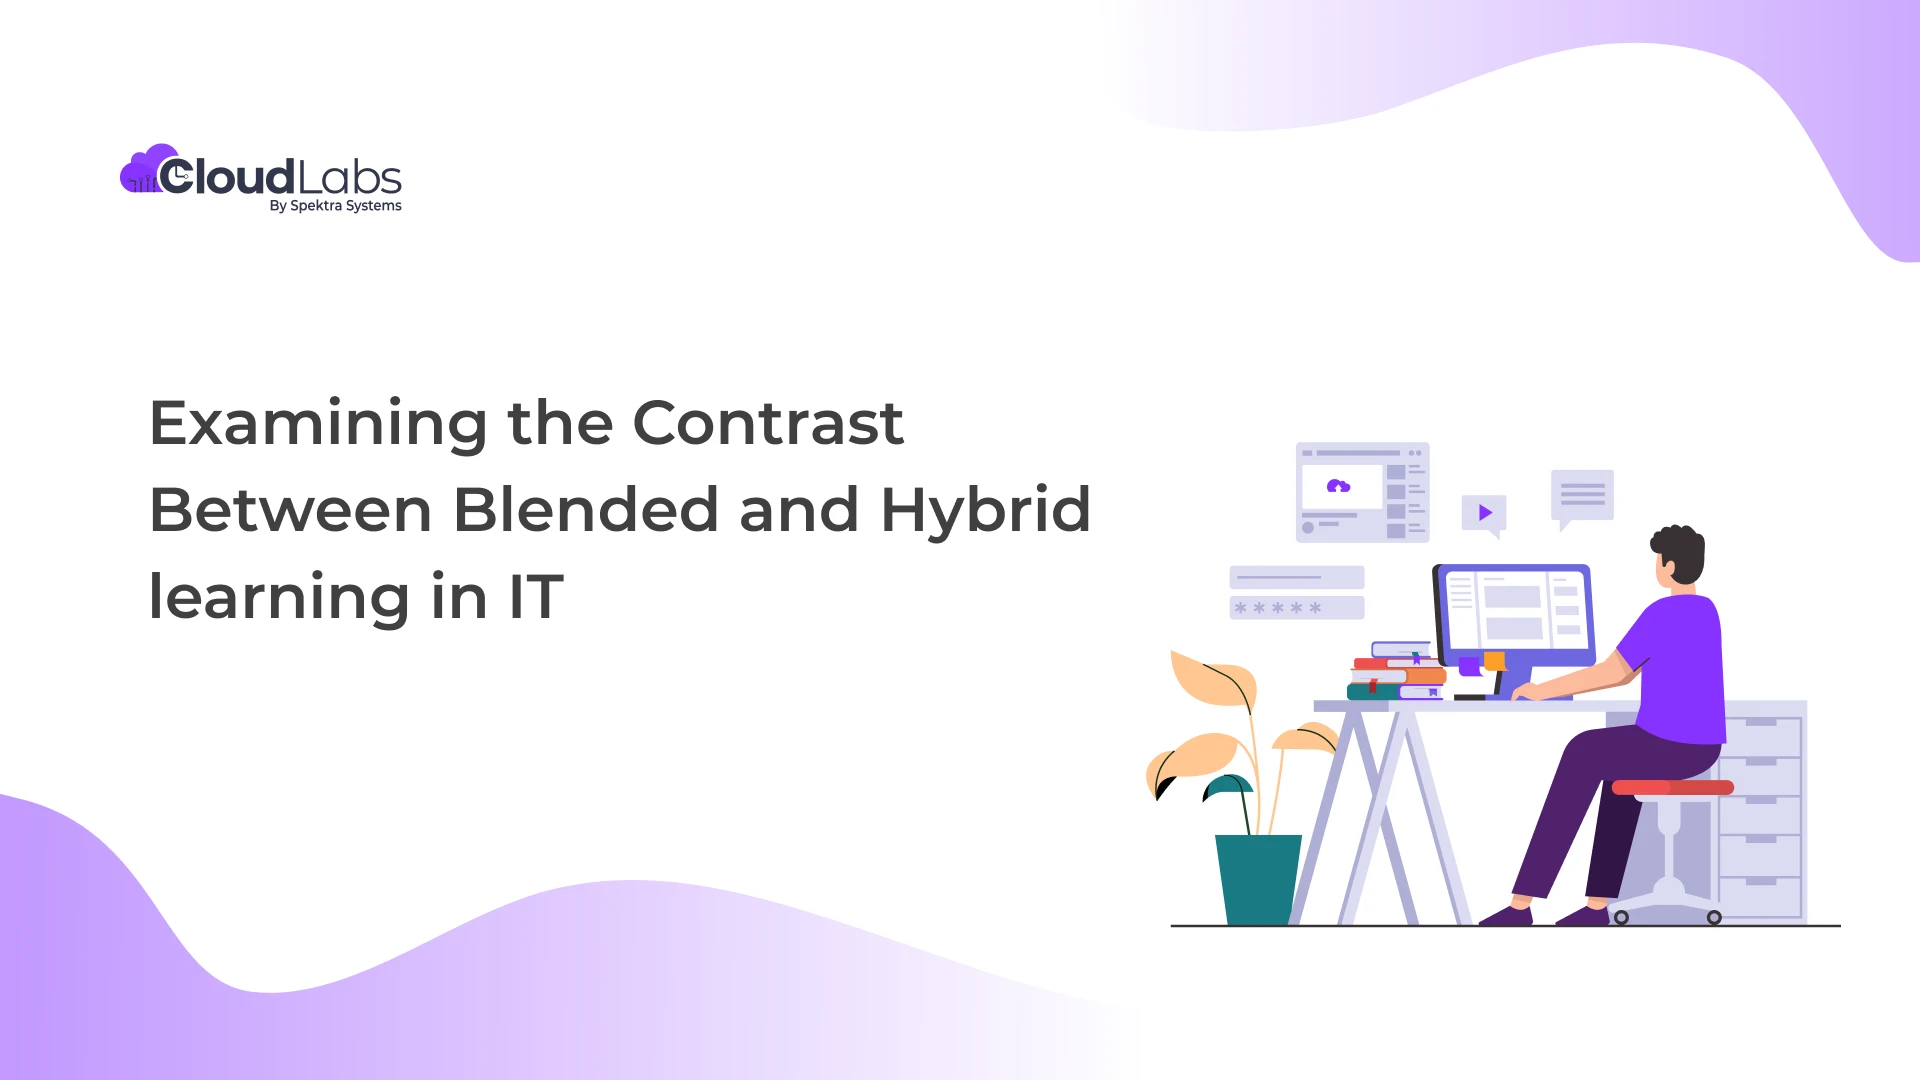 Examining the Contrast Between Blended and Hybrid learning in IT